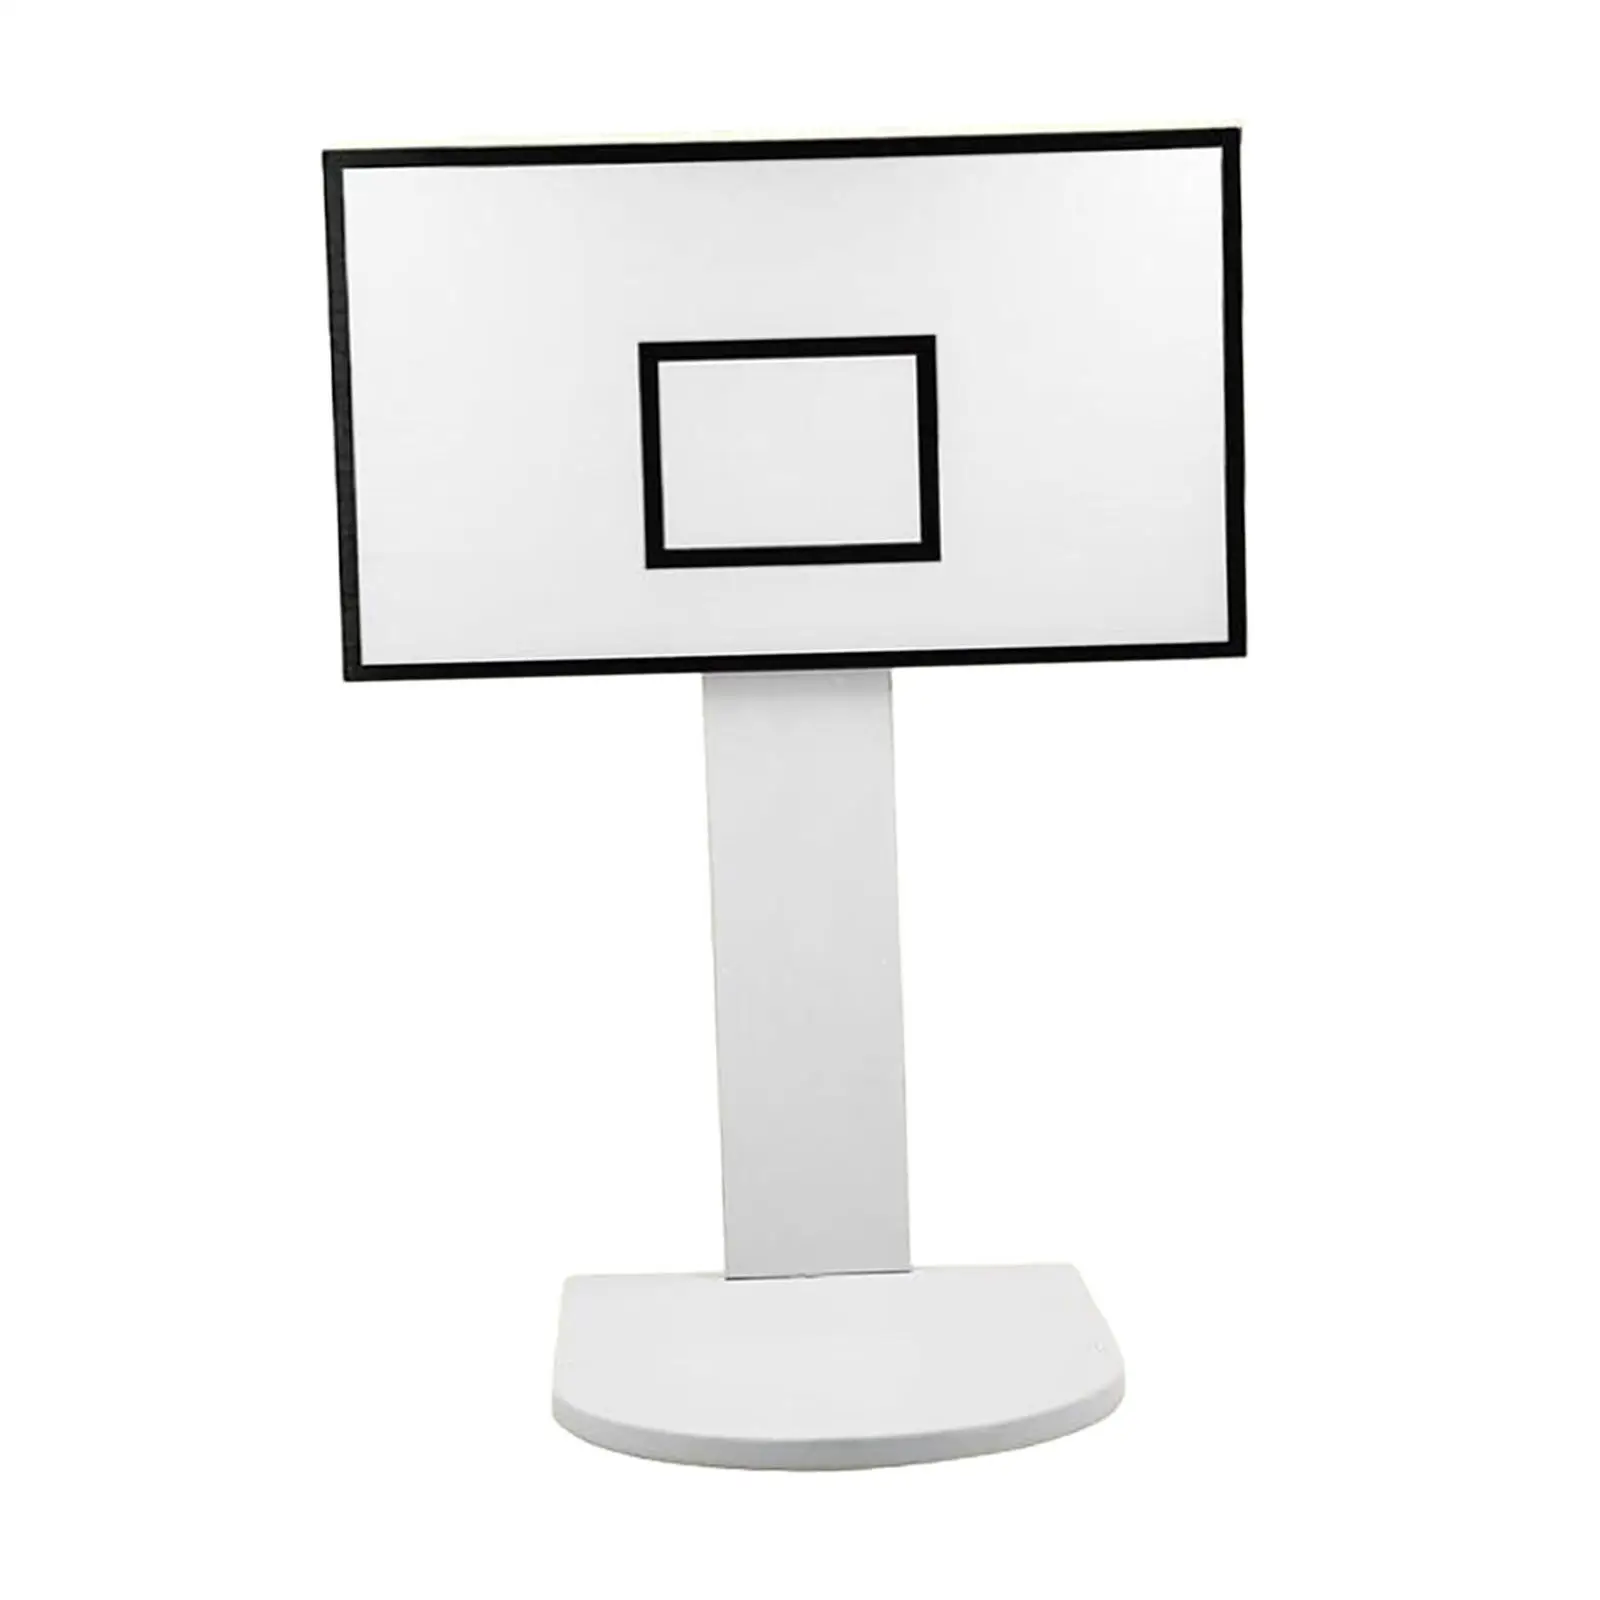 Basketball Rack without Trash Baskets Home Decor Indoor Garbage Can Basketball Frame for Home Office Shop